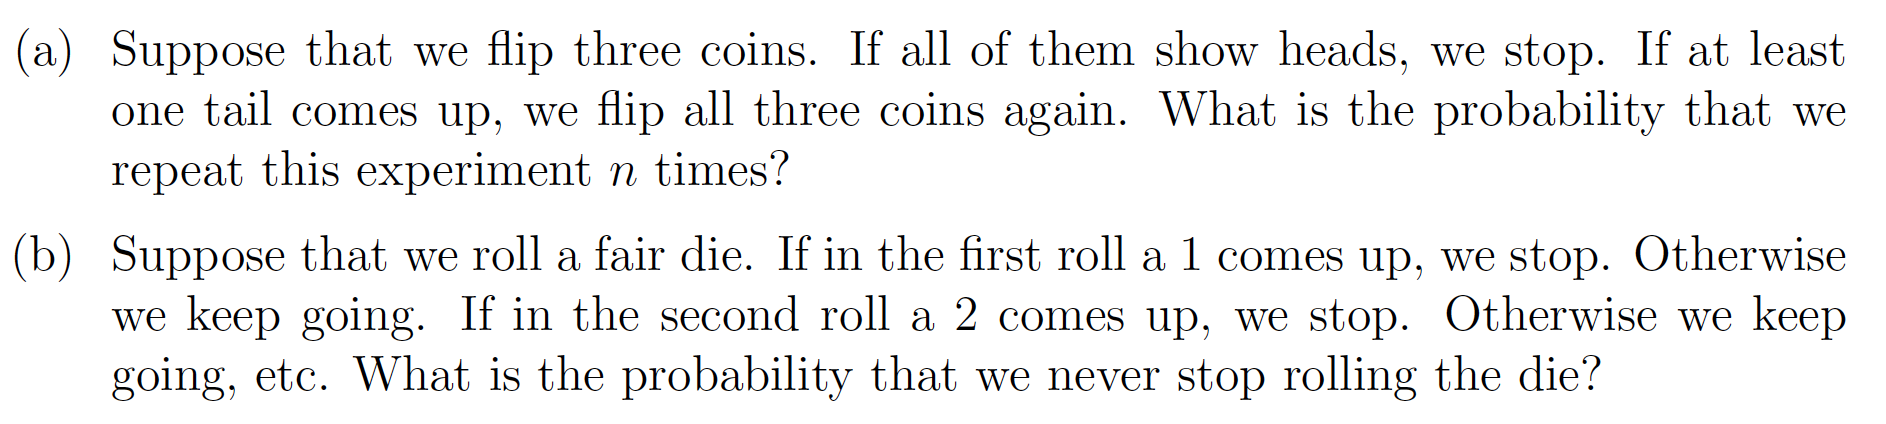 (a) Suppose that we flip three coins. If all of them show heads, we stop. If at least one tail comes up, we flip all three co